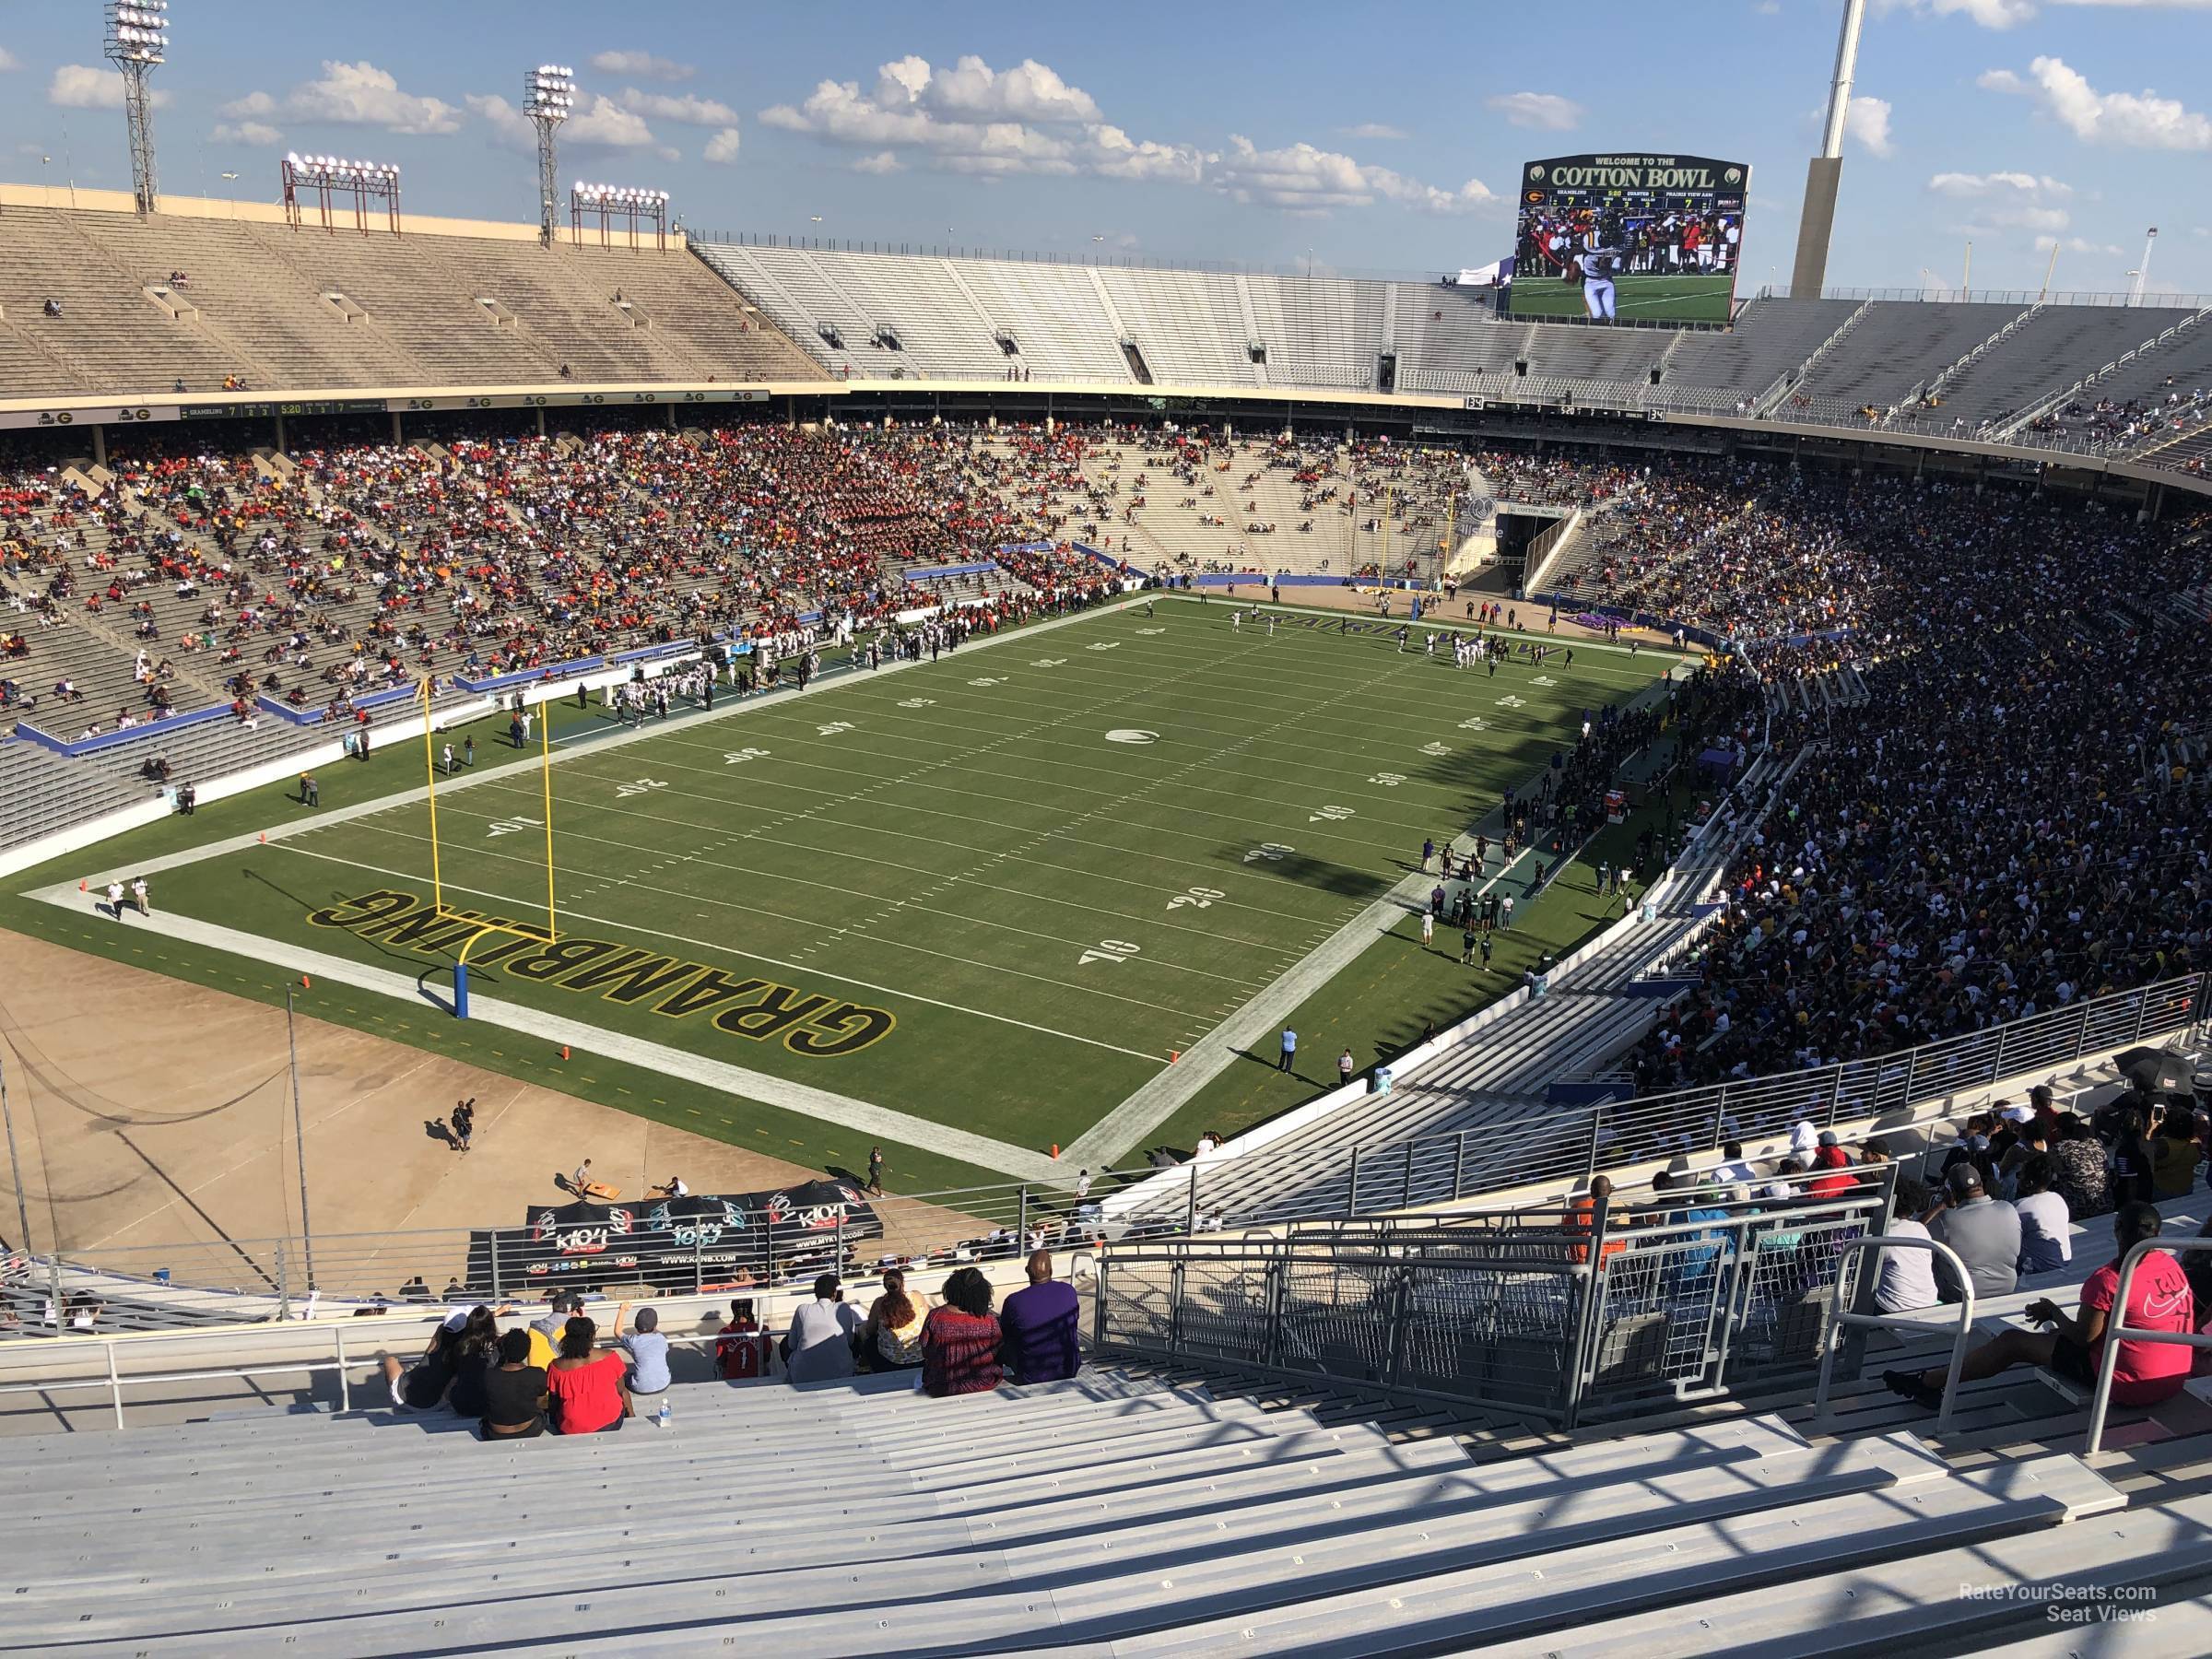 section 114, row 22 seat view  - cotton bowl